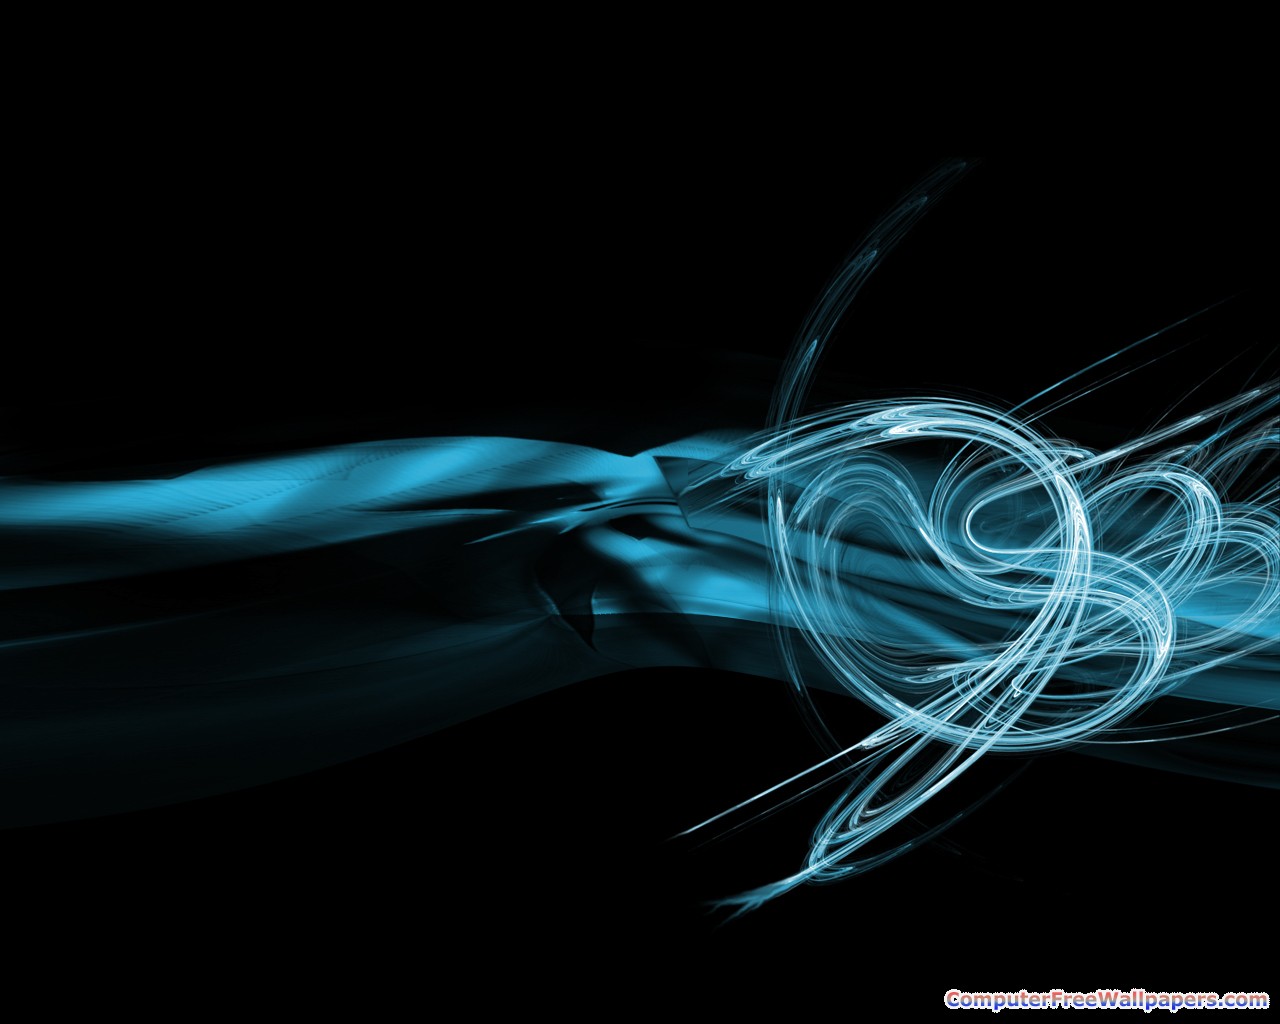 Abstract Art 1940 Hd Wallpapers in Abstract   Imagescicom